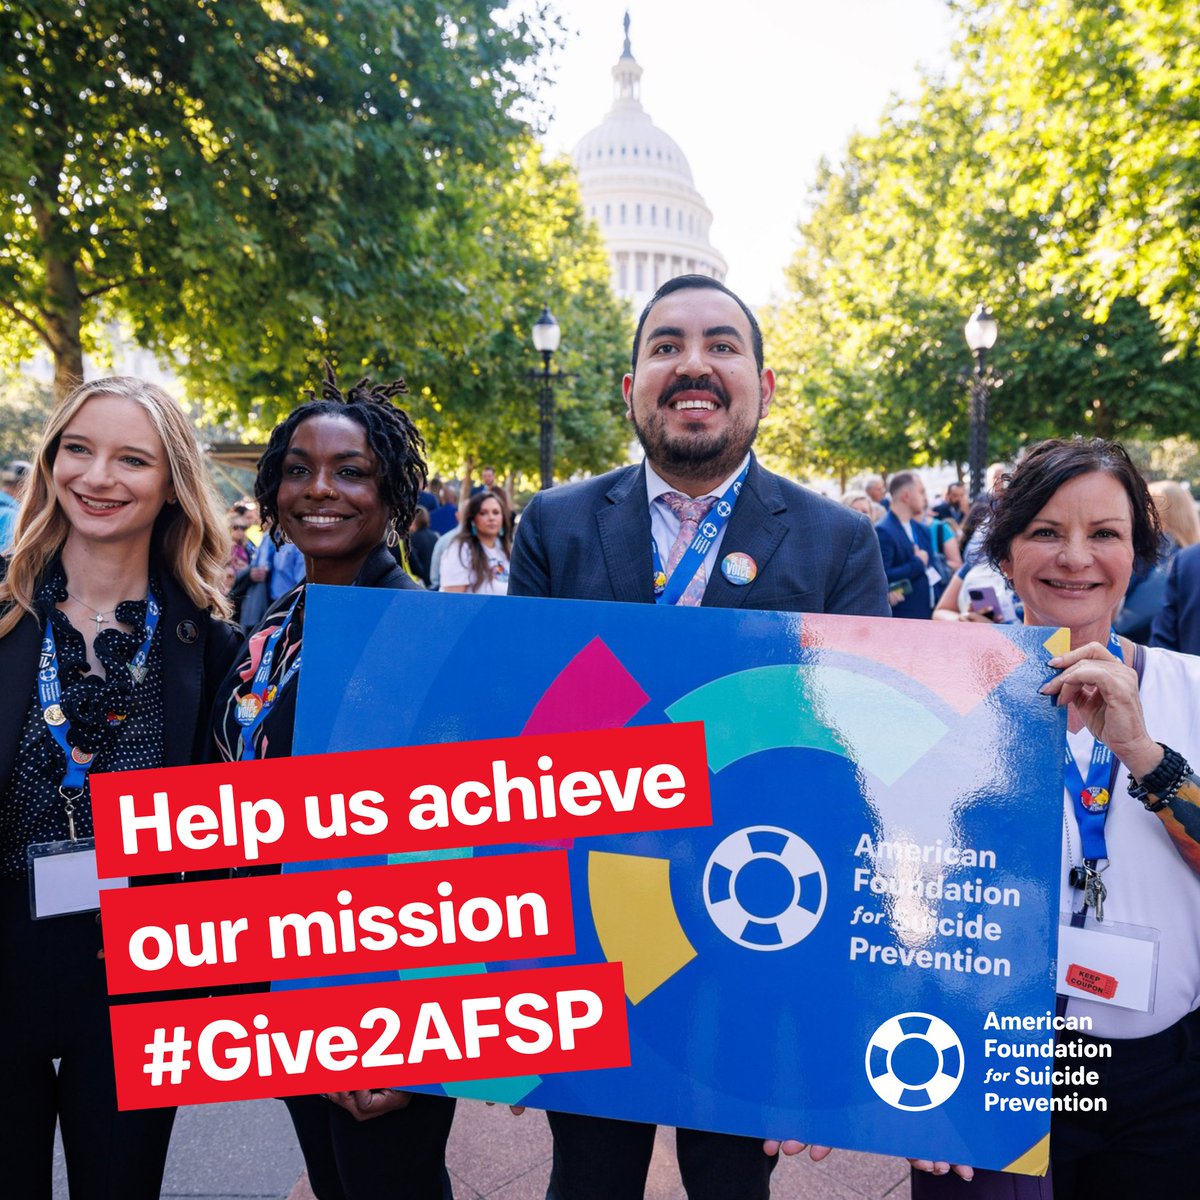 When we give, we create purpose. This Mental Health Awareness Month, we invite you to play a role in helping us achieve our mission to save lives and bring hope to those affected by suicide. #Give2AFSP supporting.afsp.org/event/MayGifto…